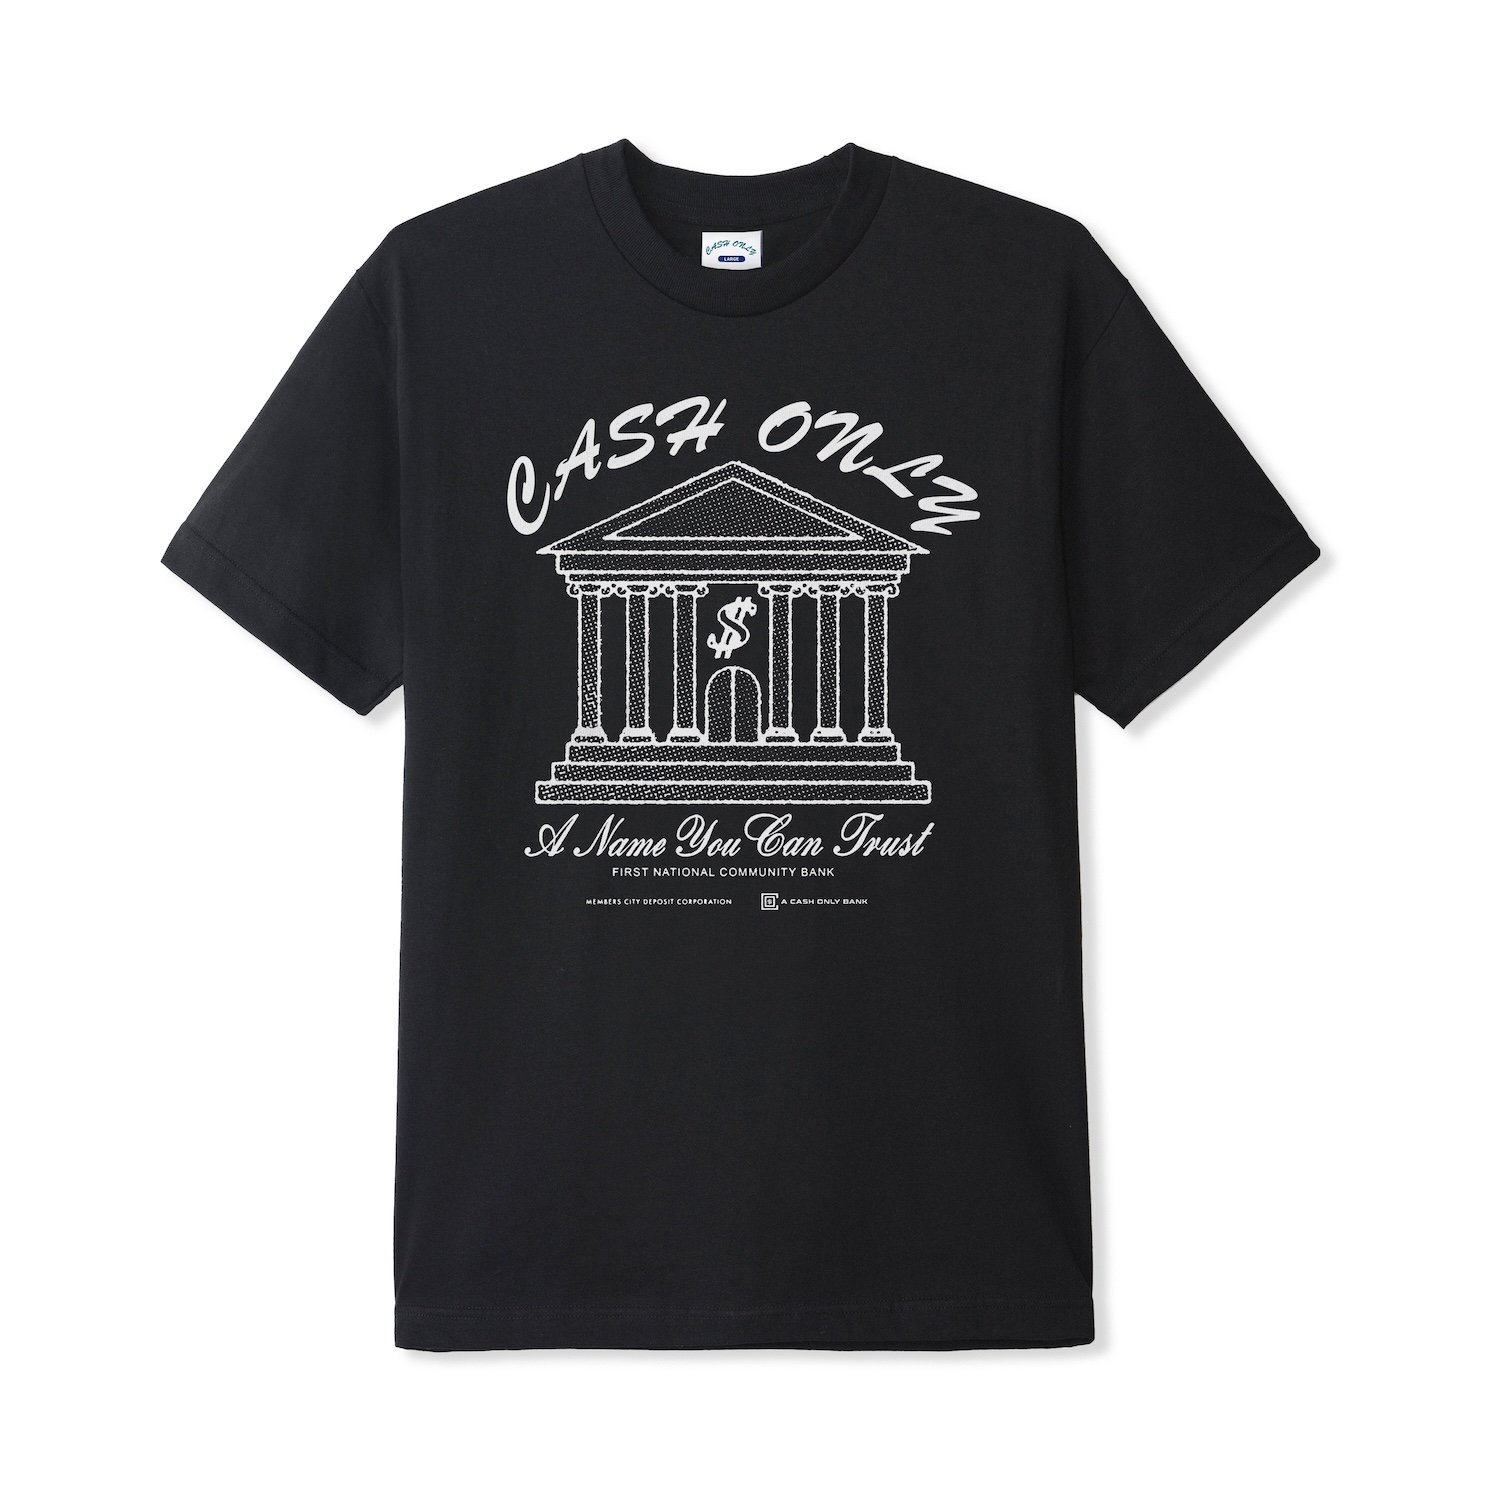 Cash Only<br>Bank Tee<br>